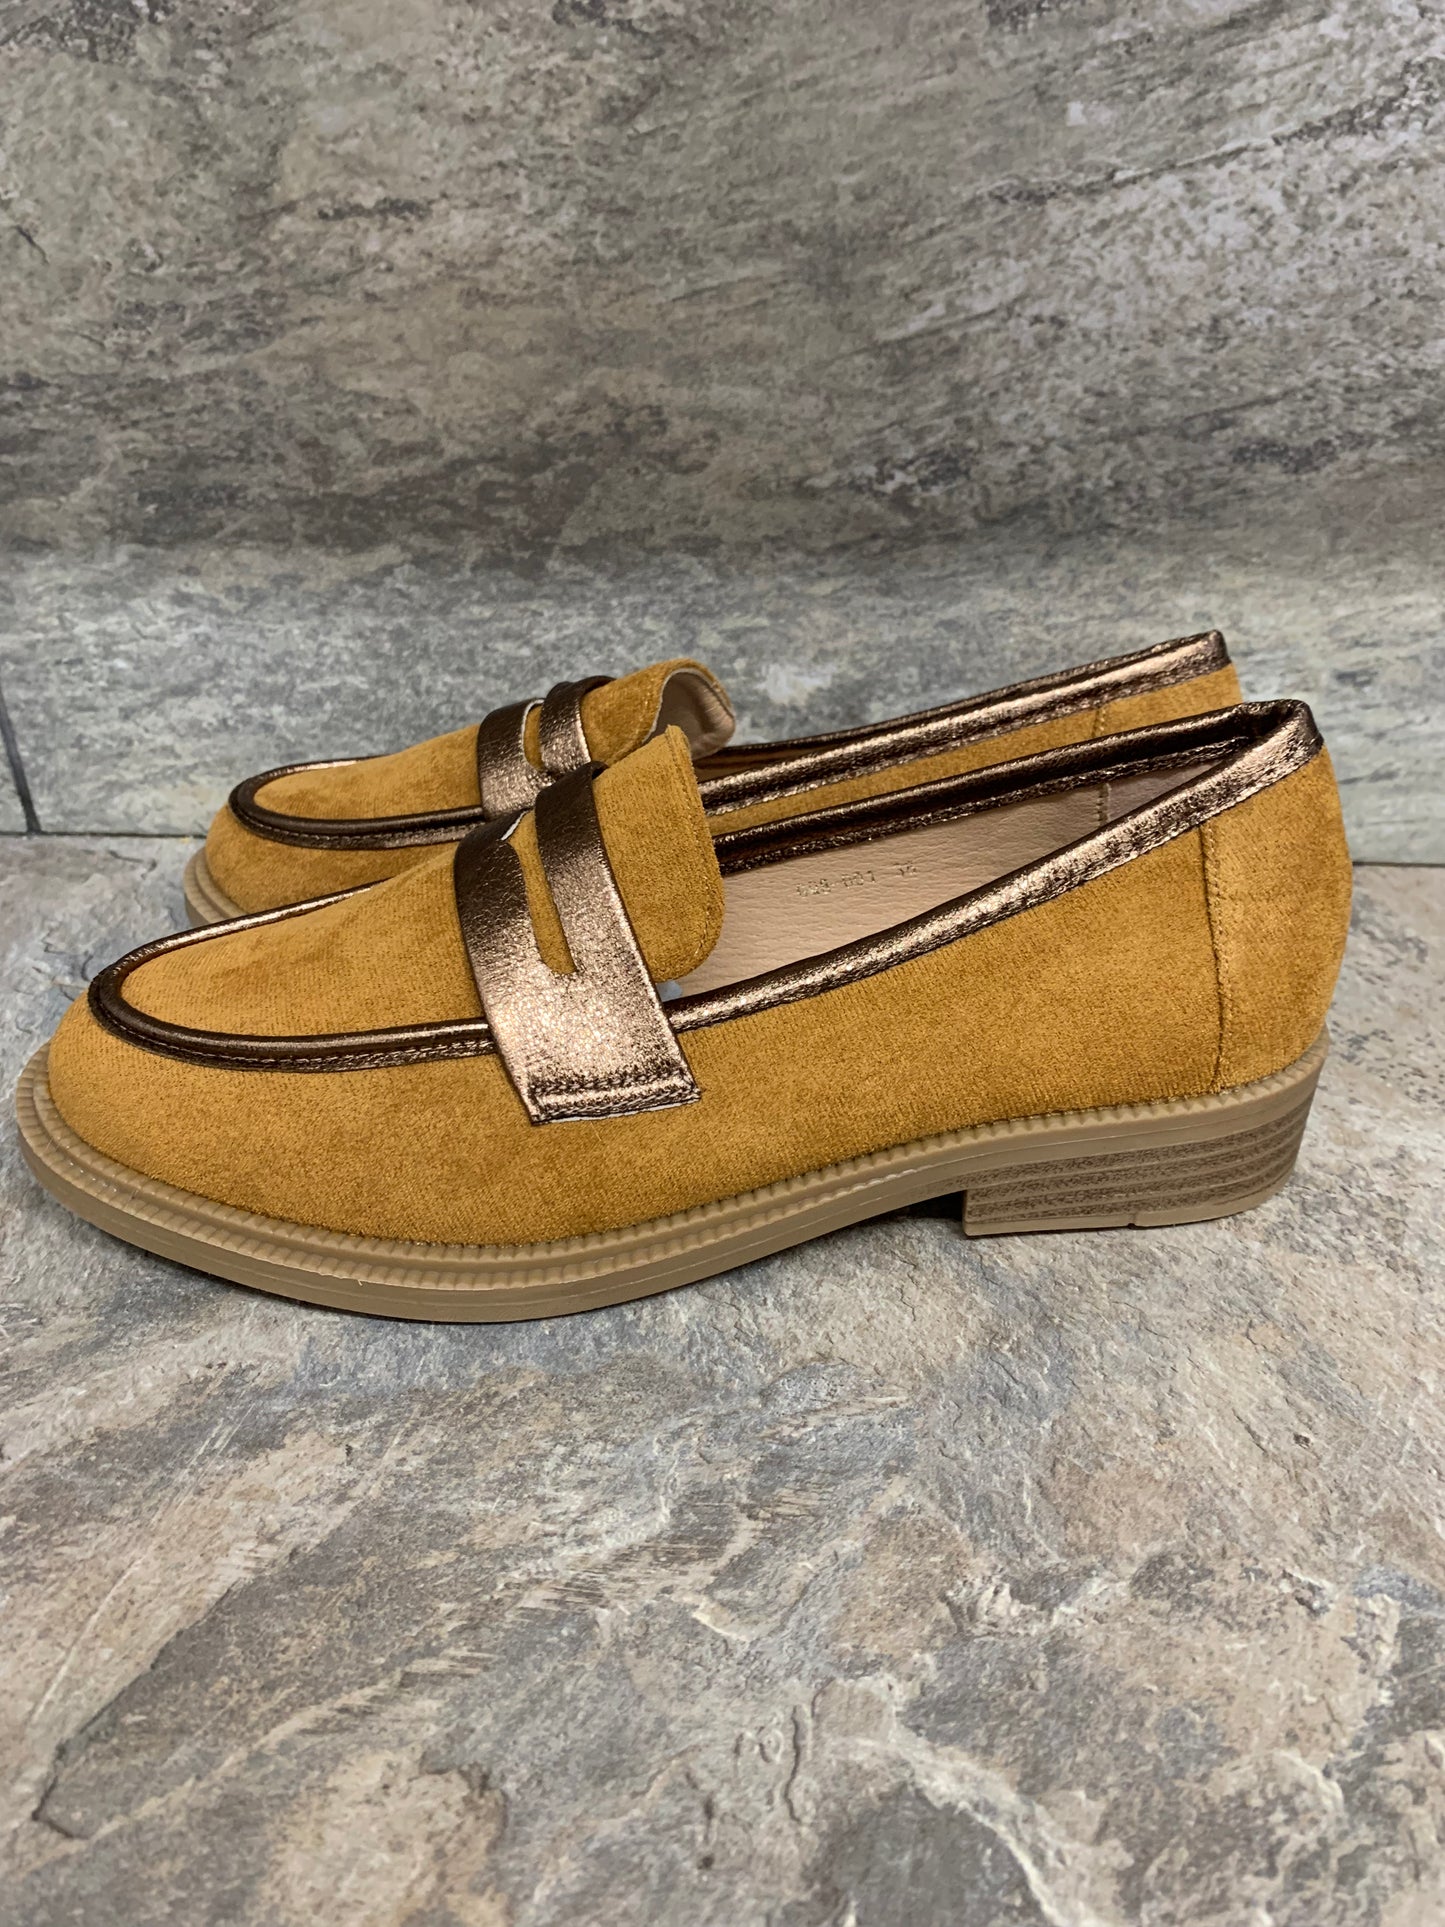 Camel loafer with metallic detail sizes 3-8